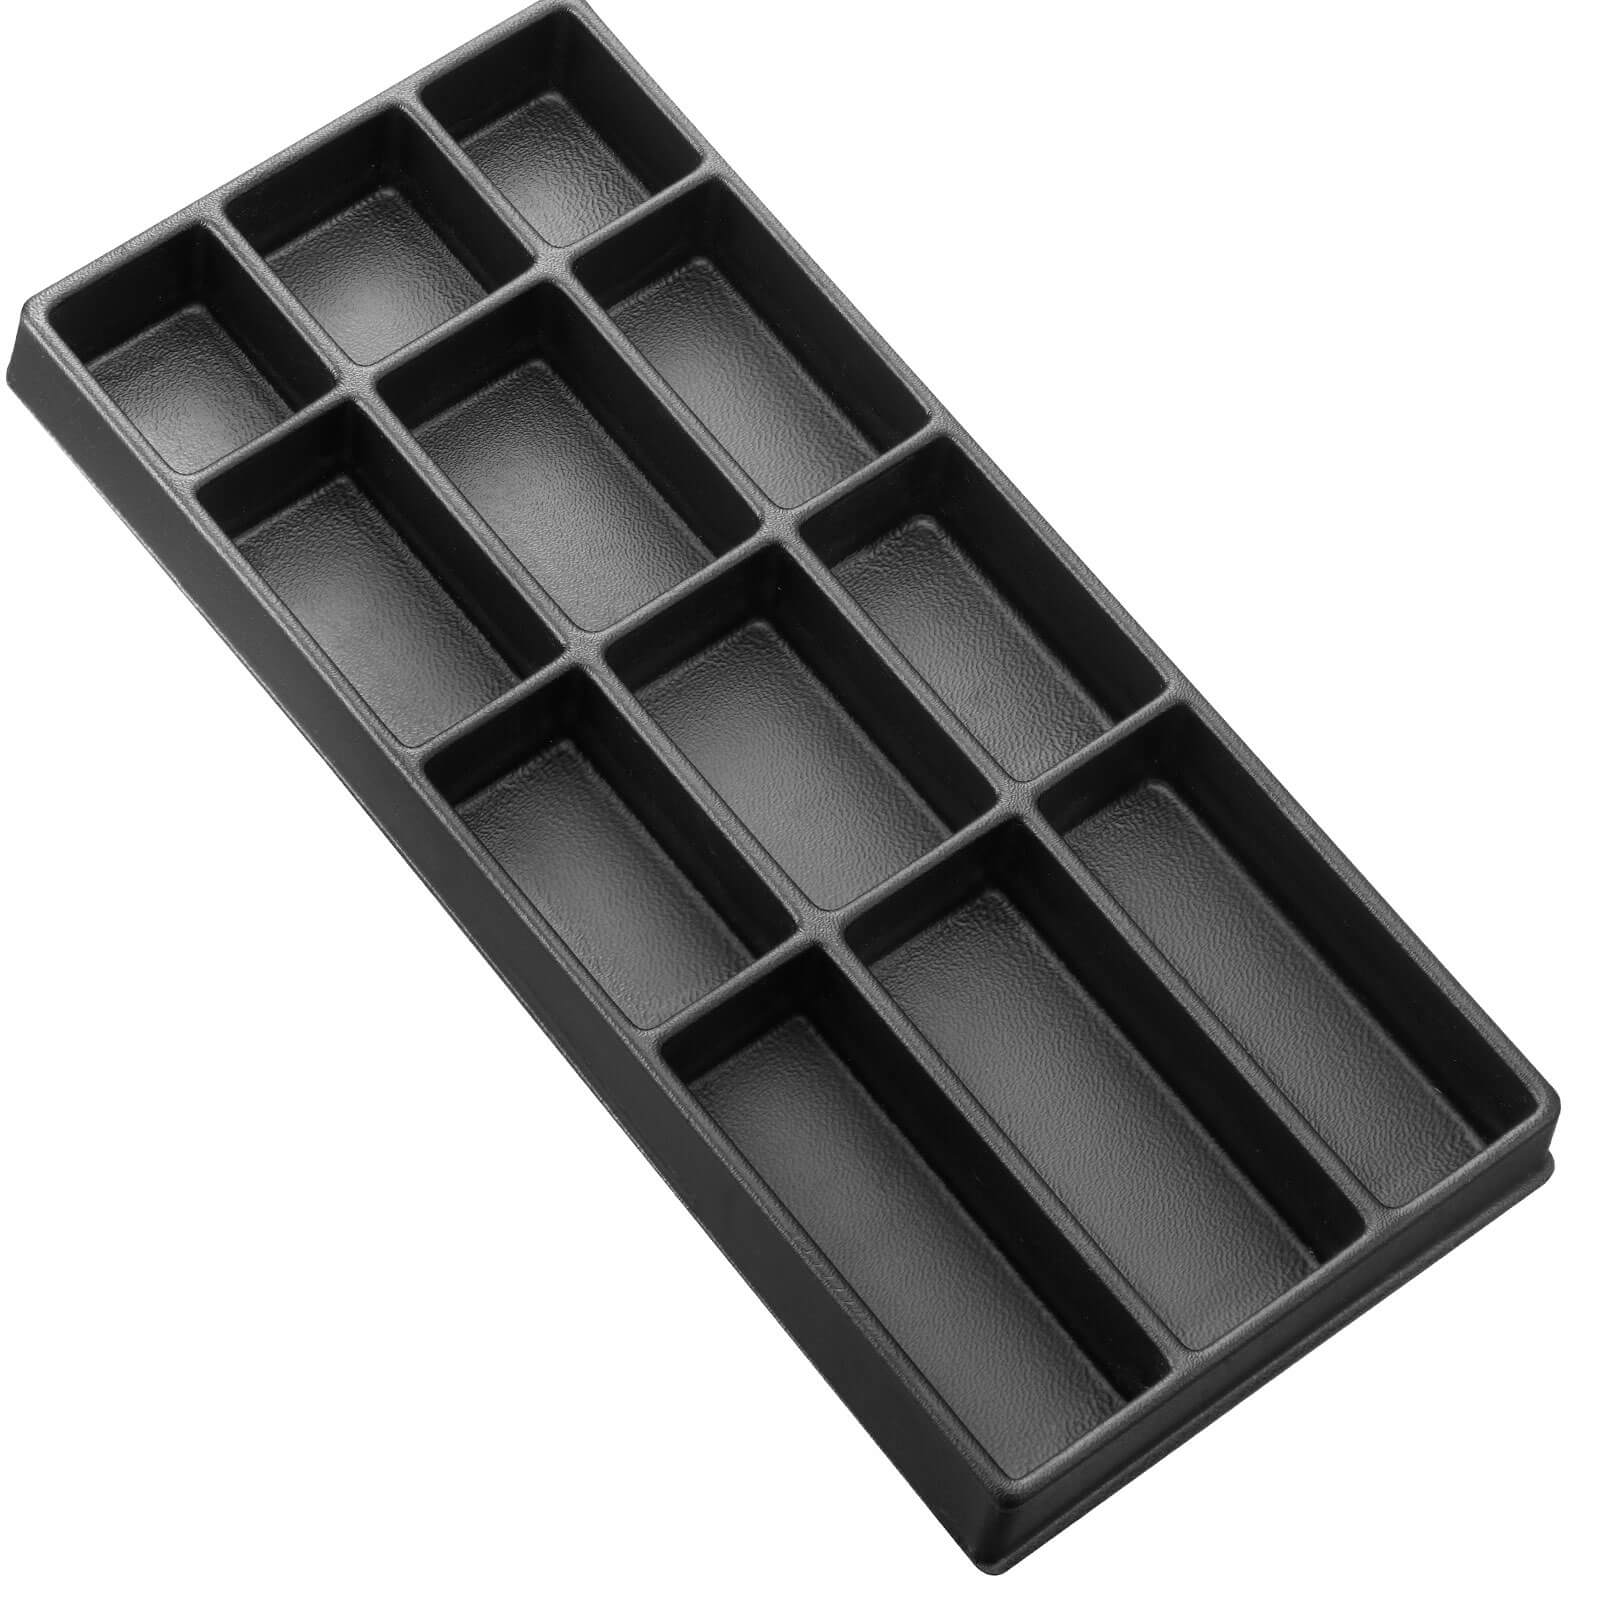 Image of Expert by Facom Organiser Module Tray for Roller Cabinets and Tool Chests